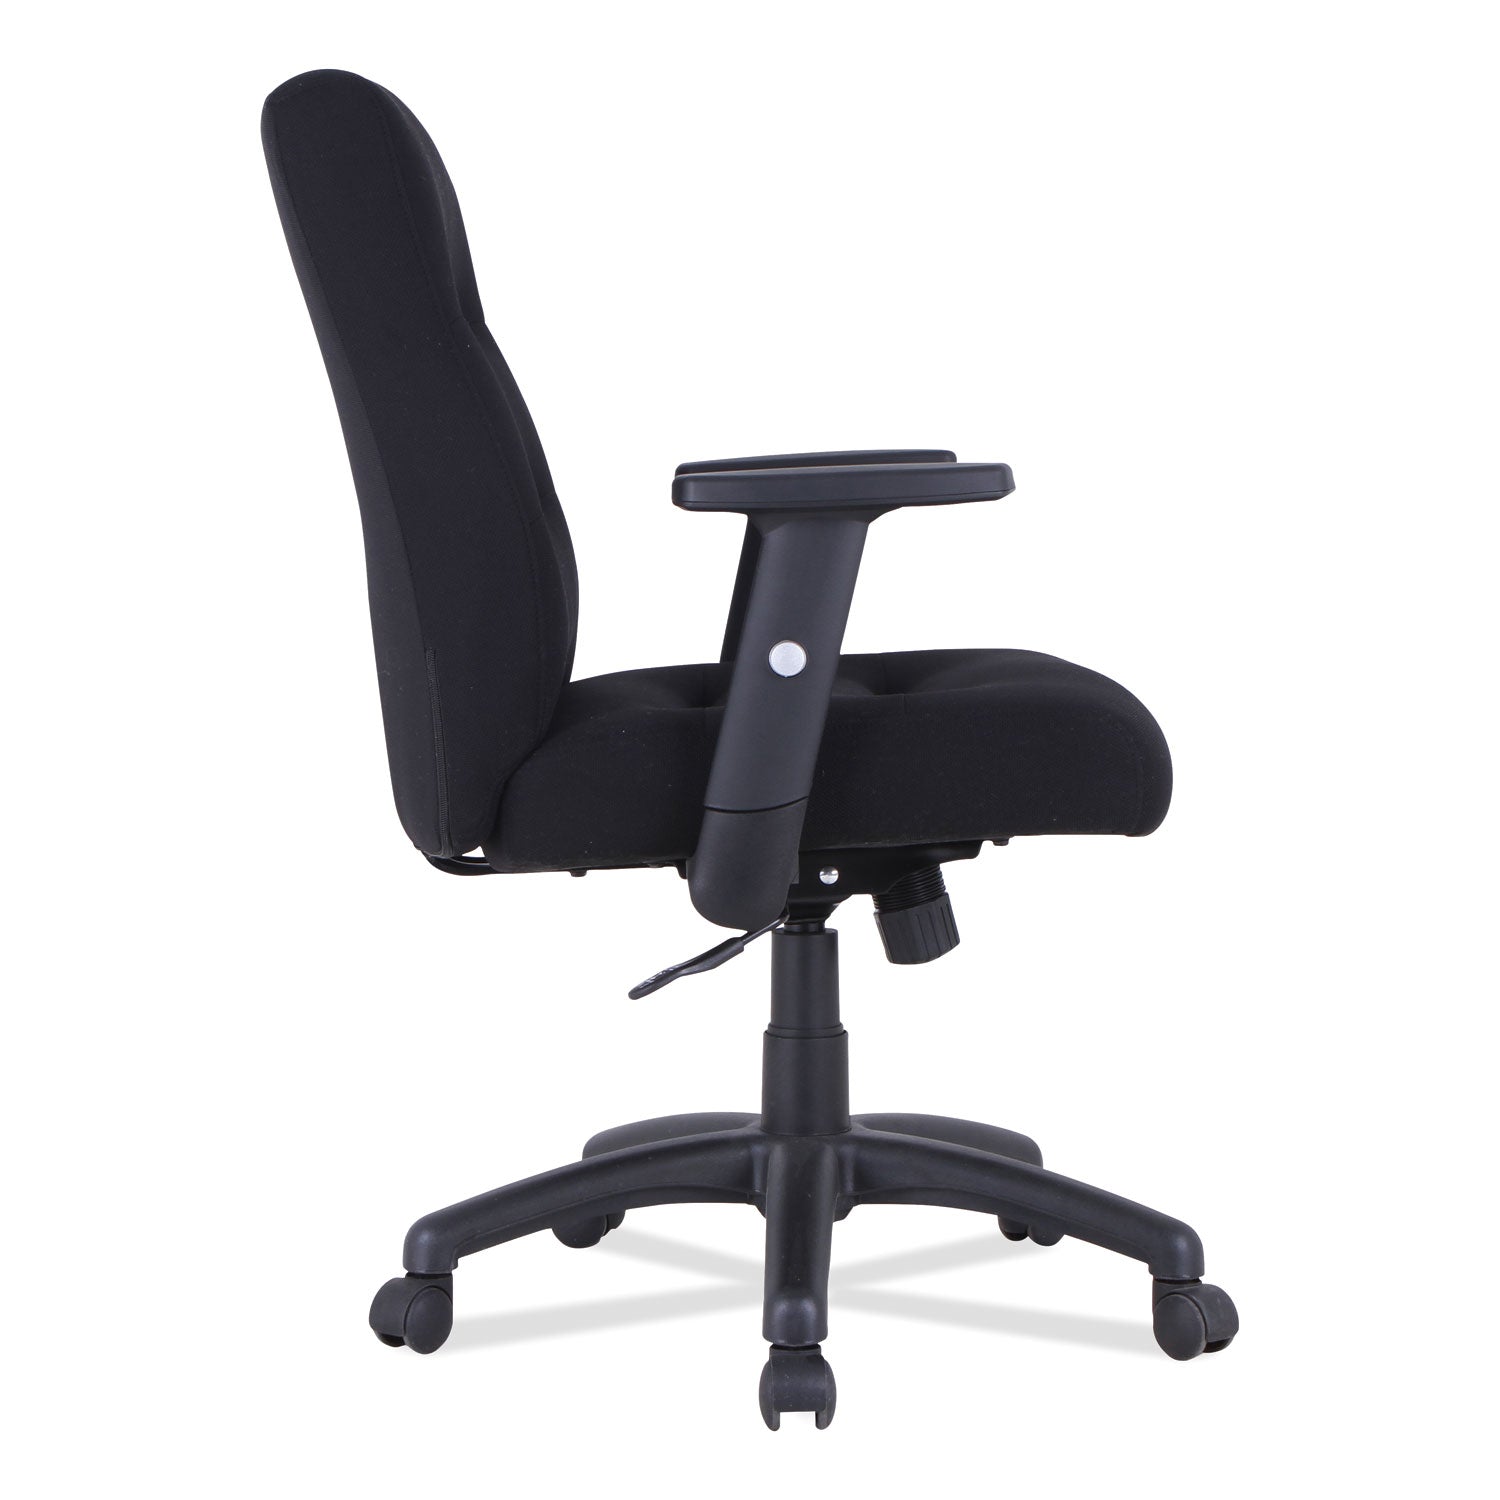 alera-kesson-series-petite-office-chair-supports-up-to-300-lb-1771-to-2165-seat-height-black_aleks4010 - 7